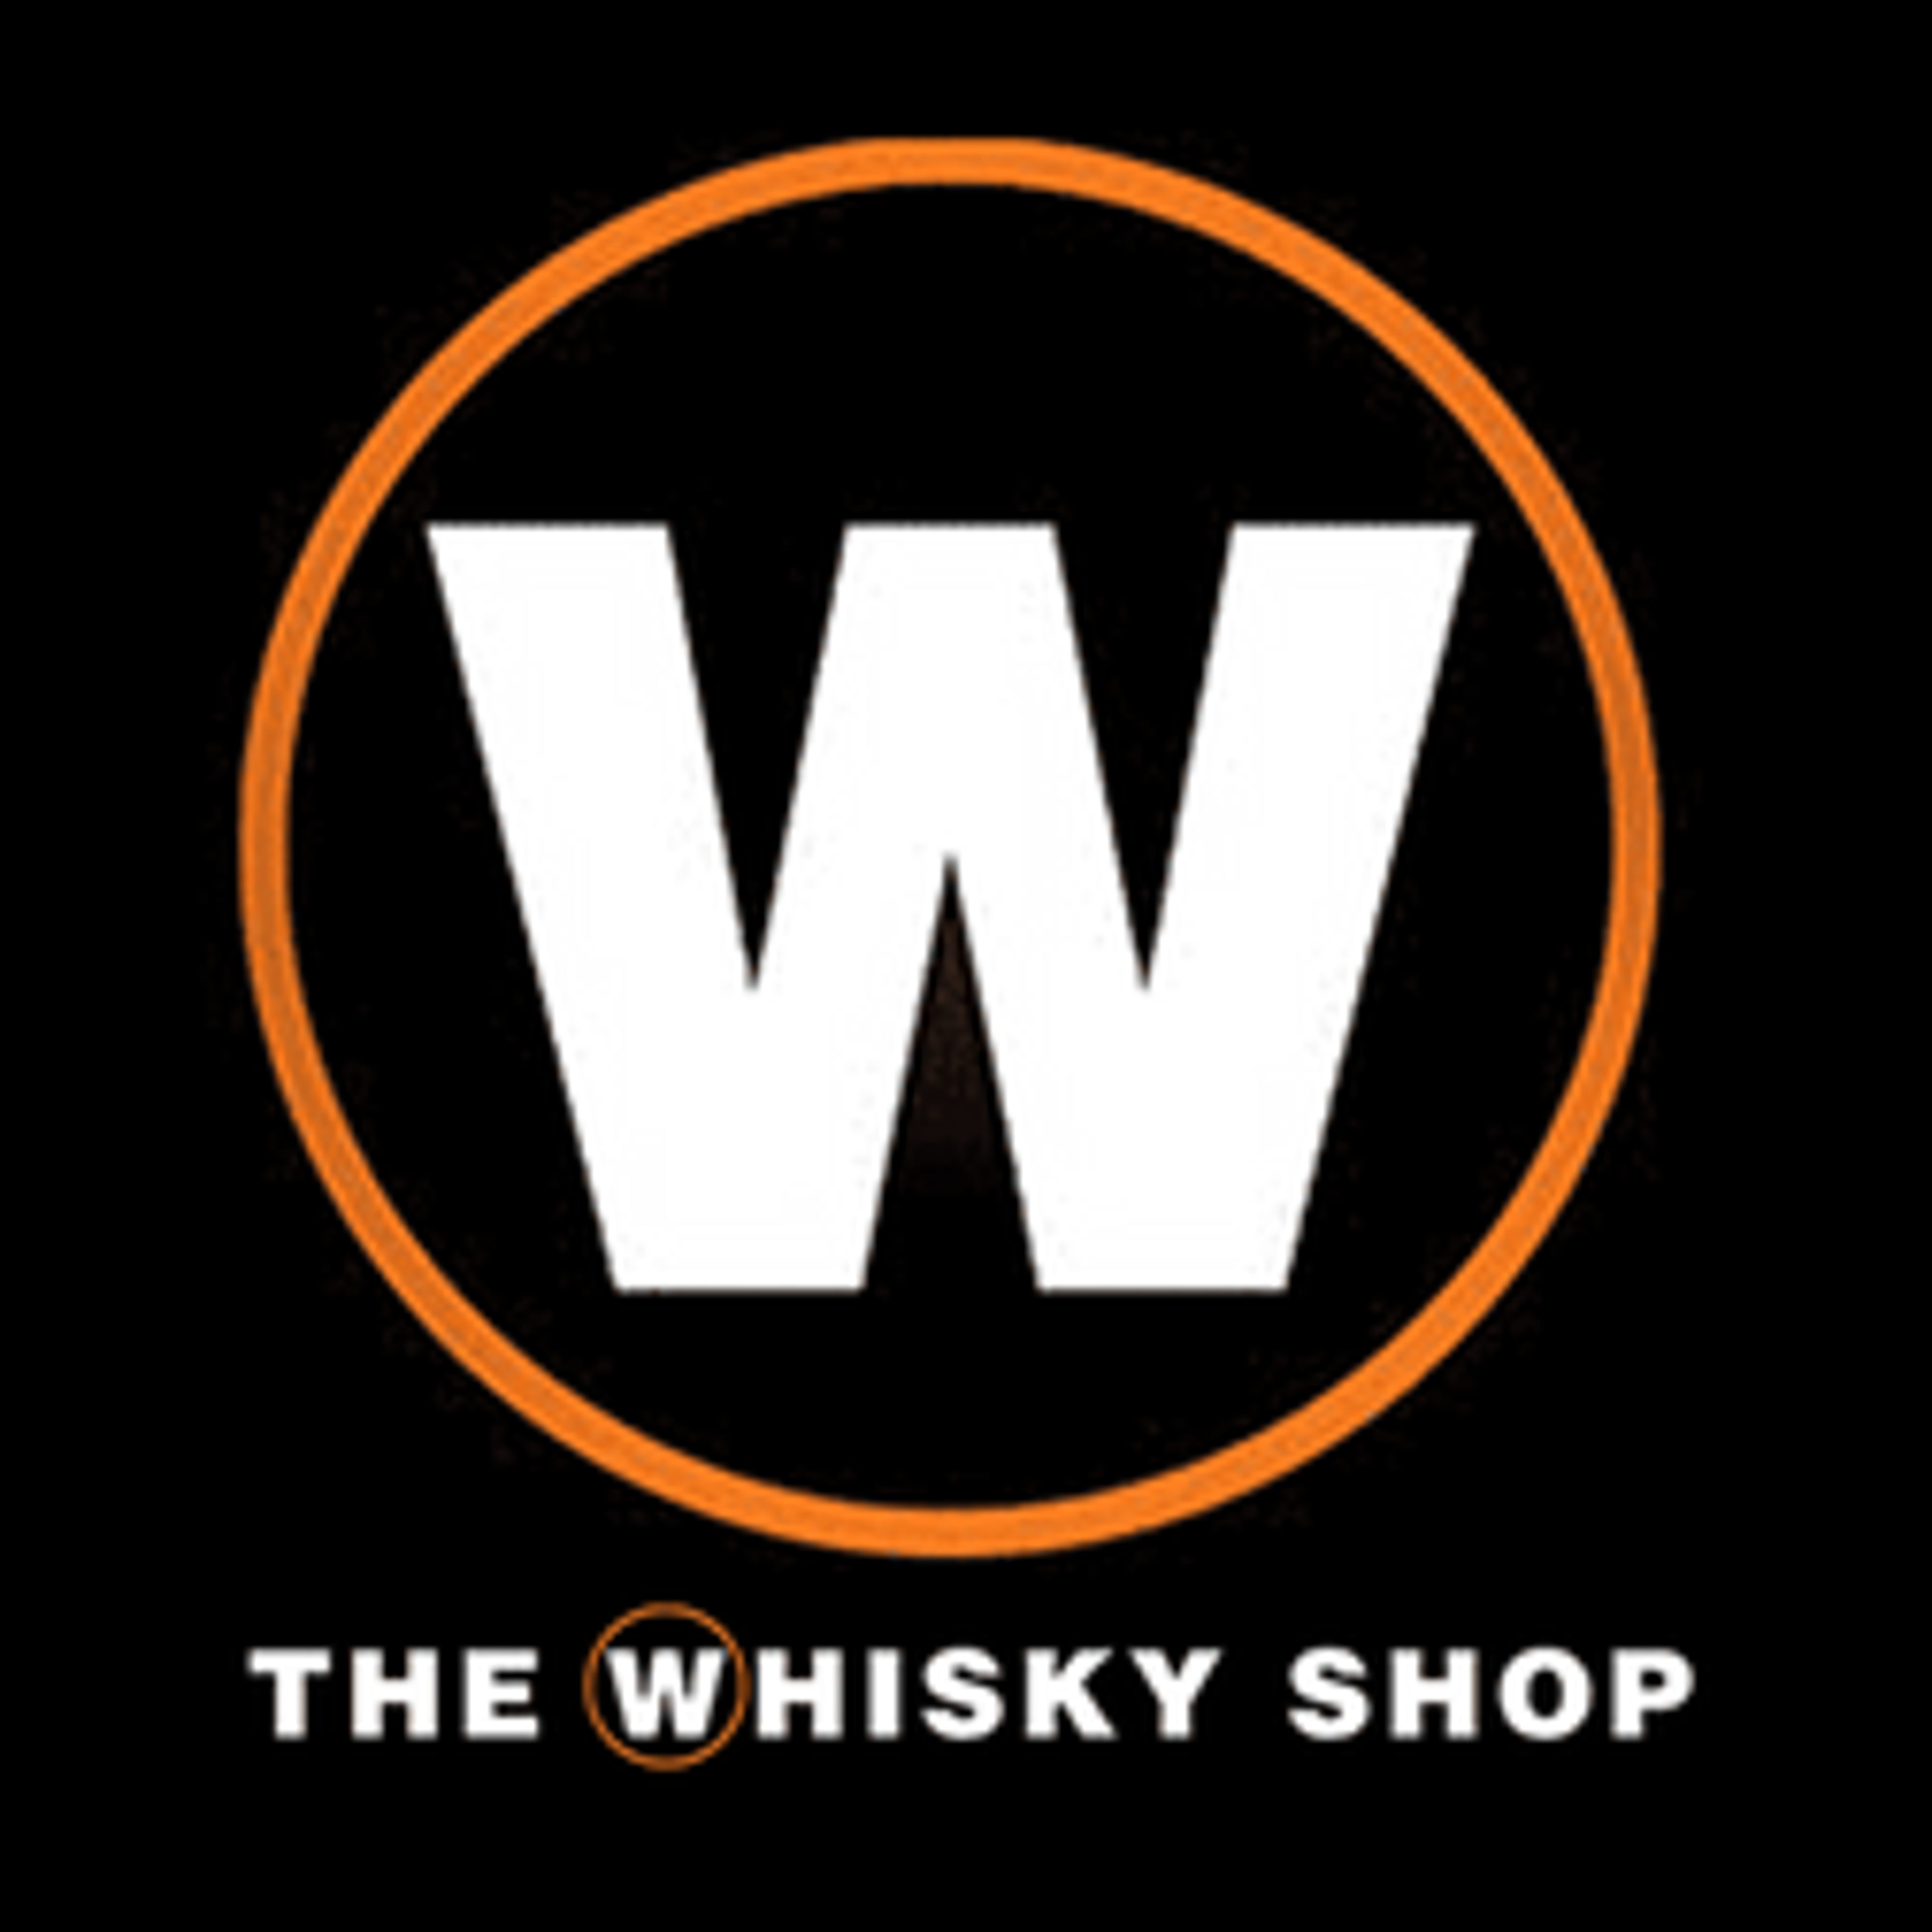  The Whisky Shop 